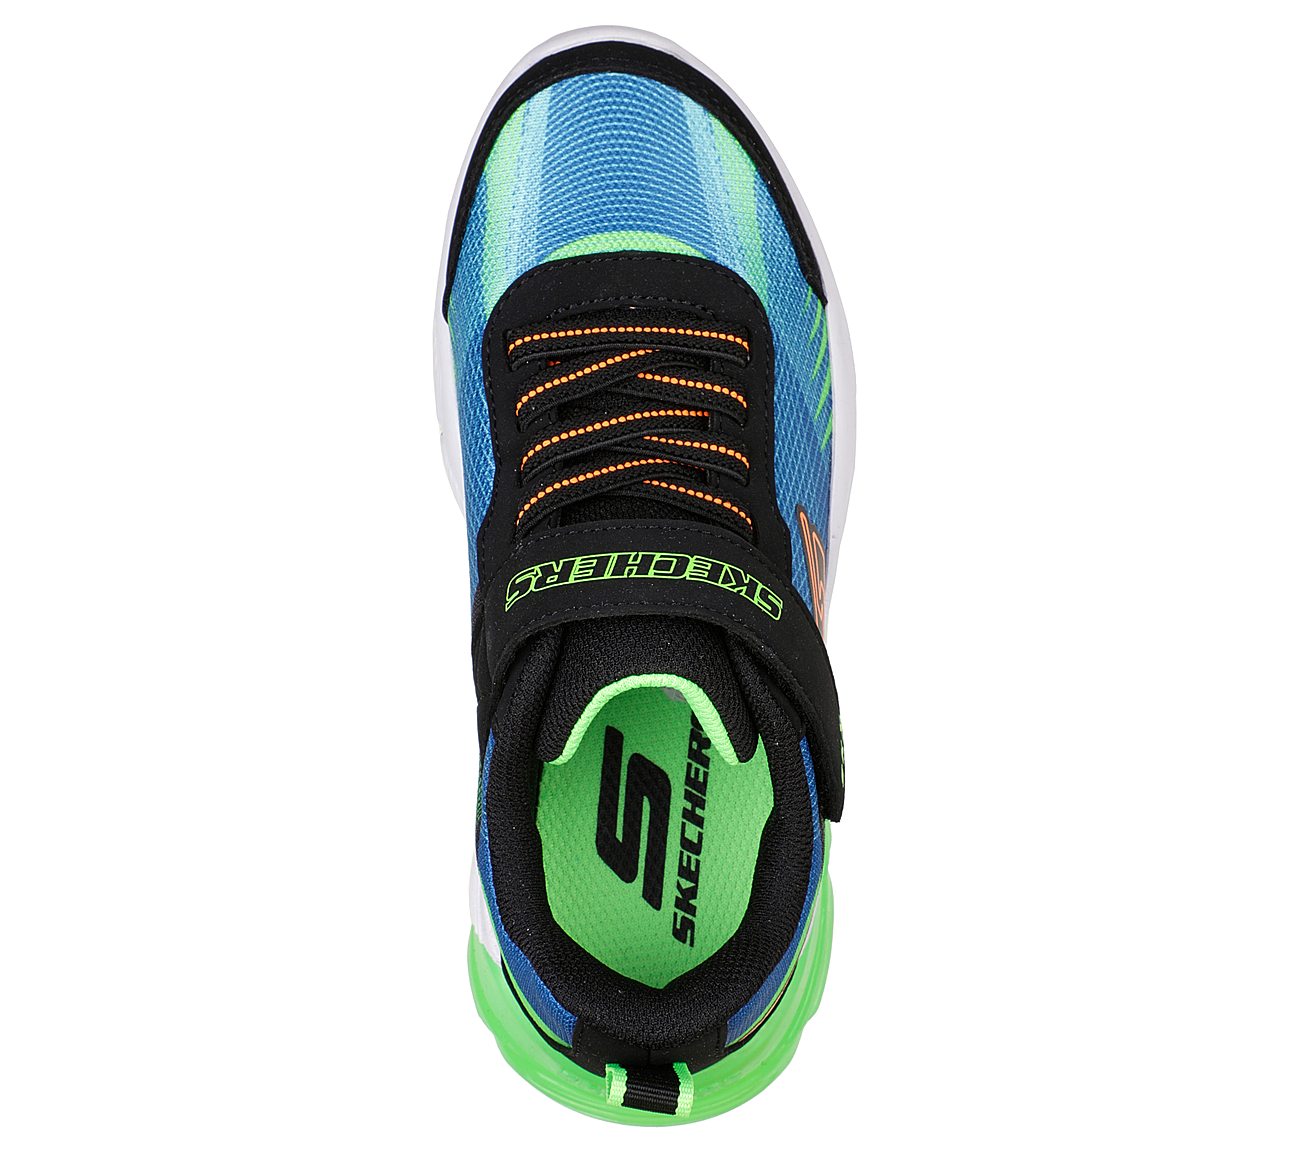 THERMOFLUX 2.0 - KODRON, BLUE/LIME Footwear Top View